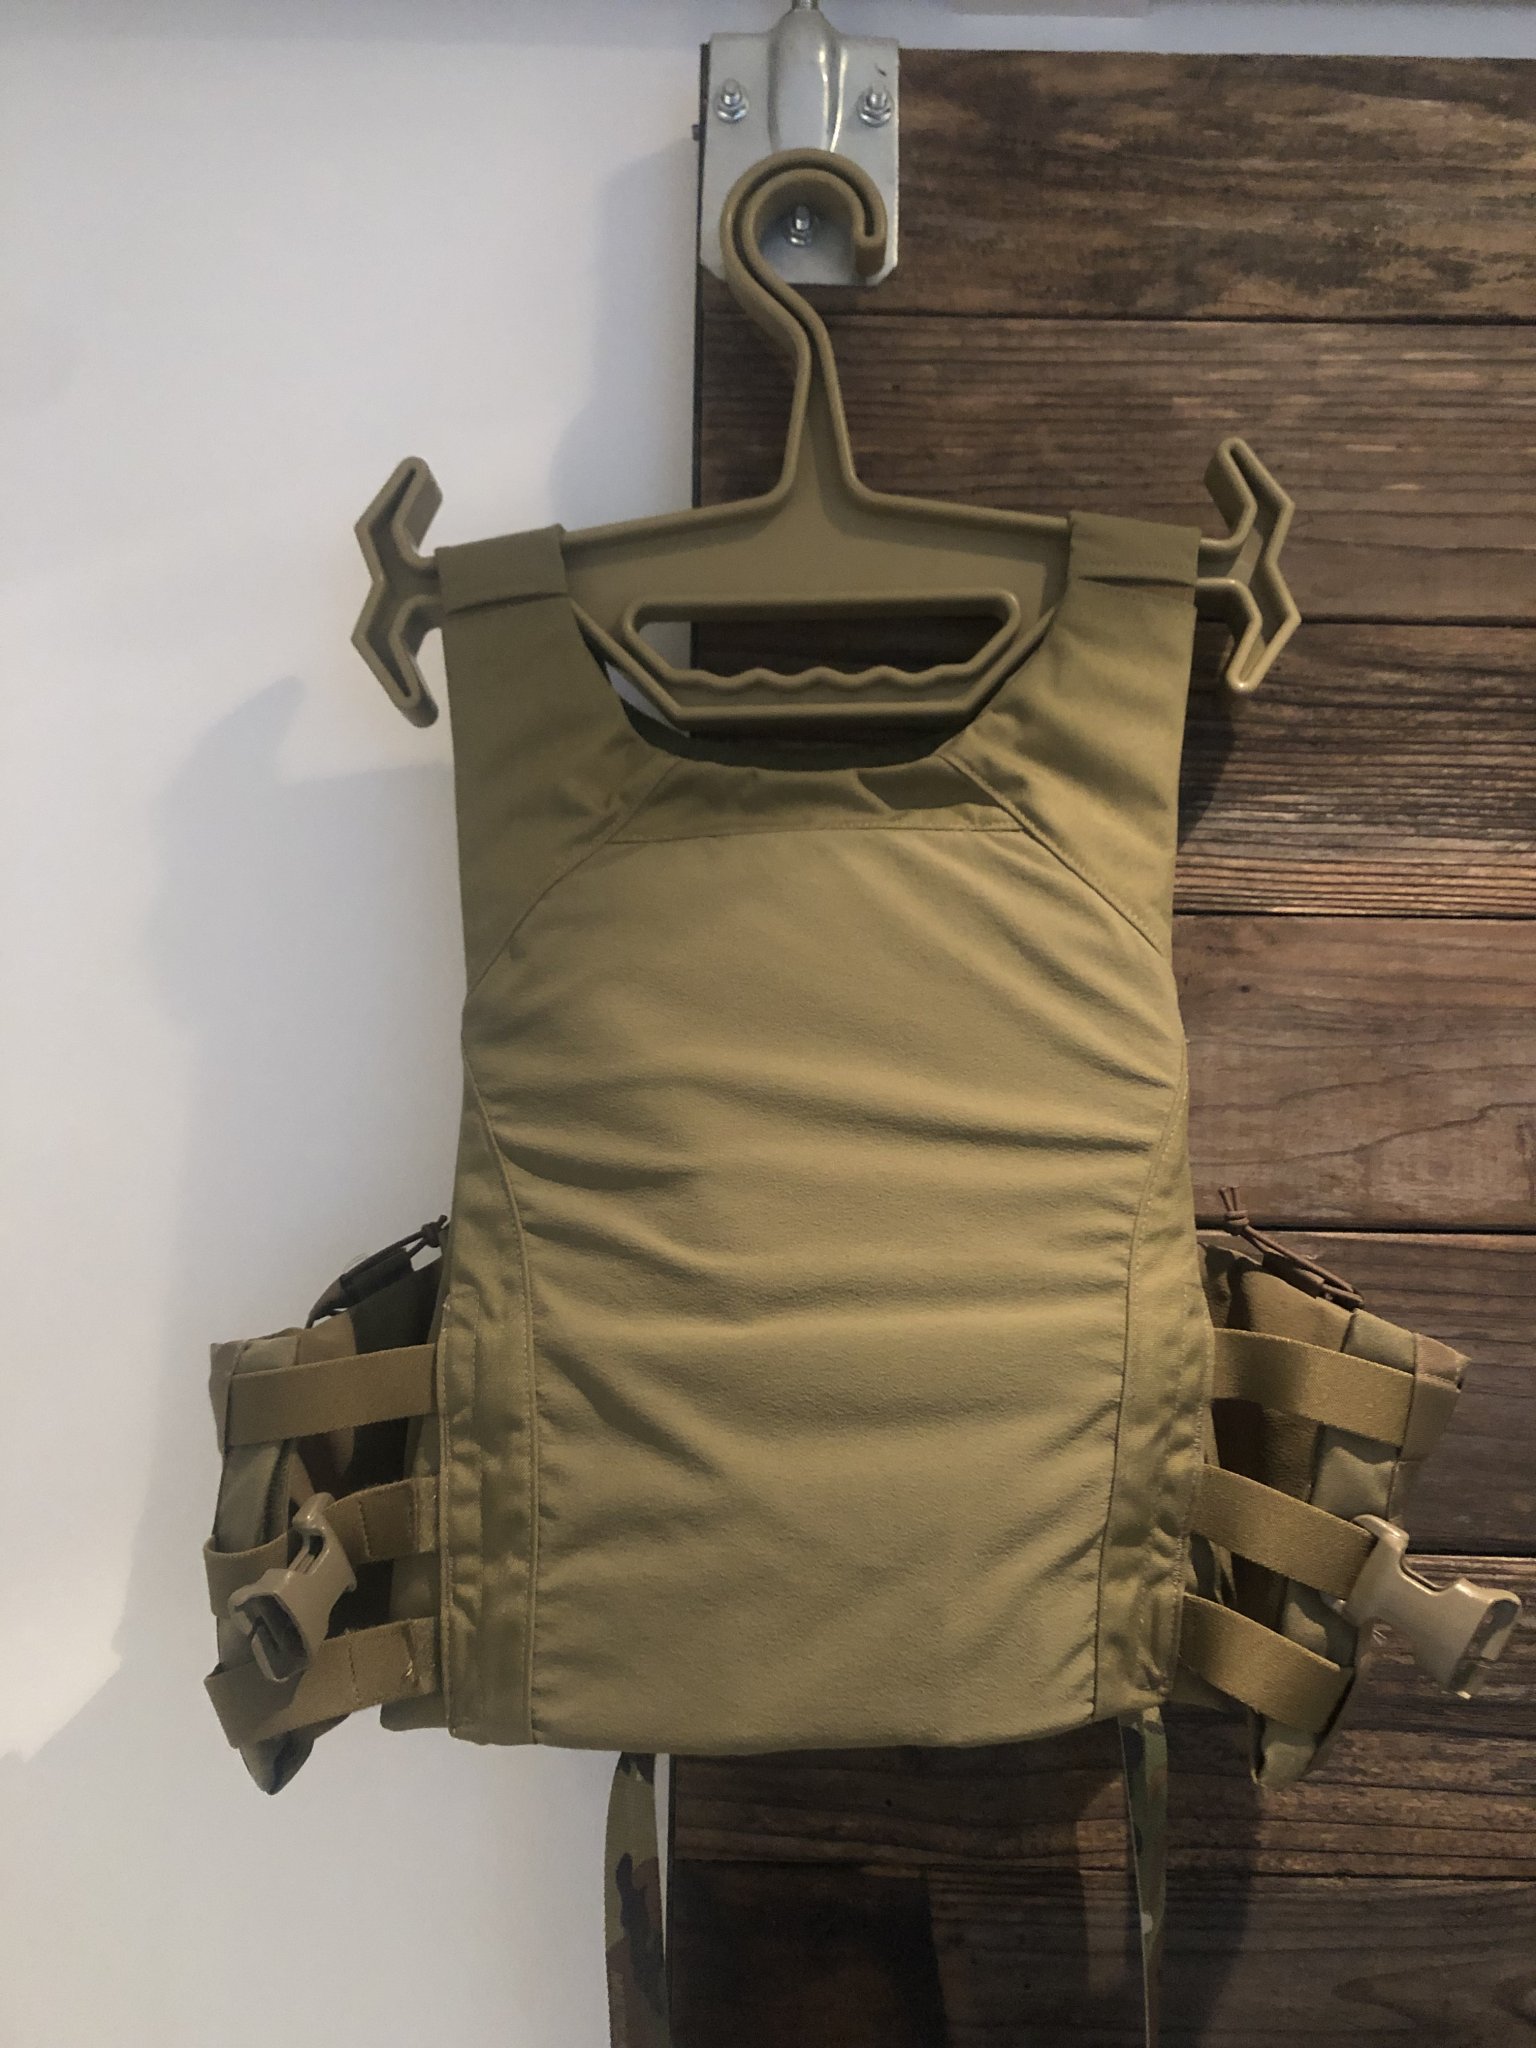 Crye Precision LV-MBAV Plate Carriers and Radio/Side Armor